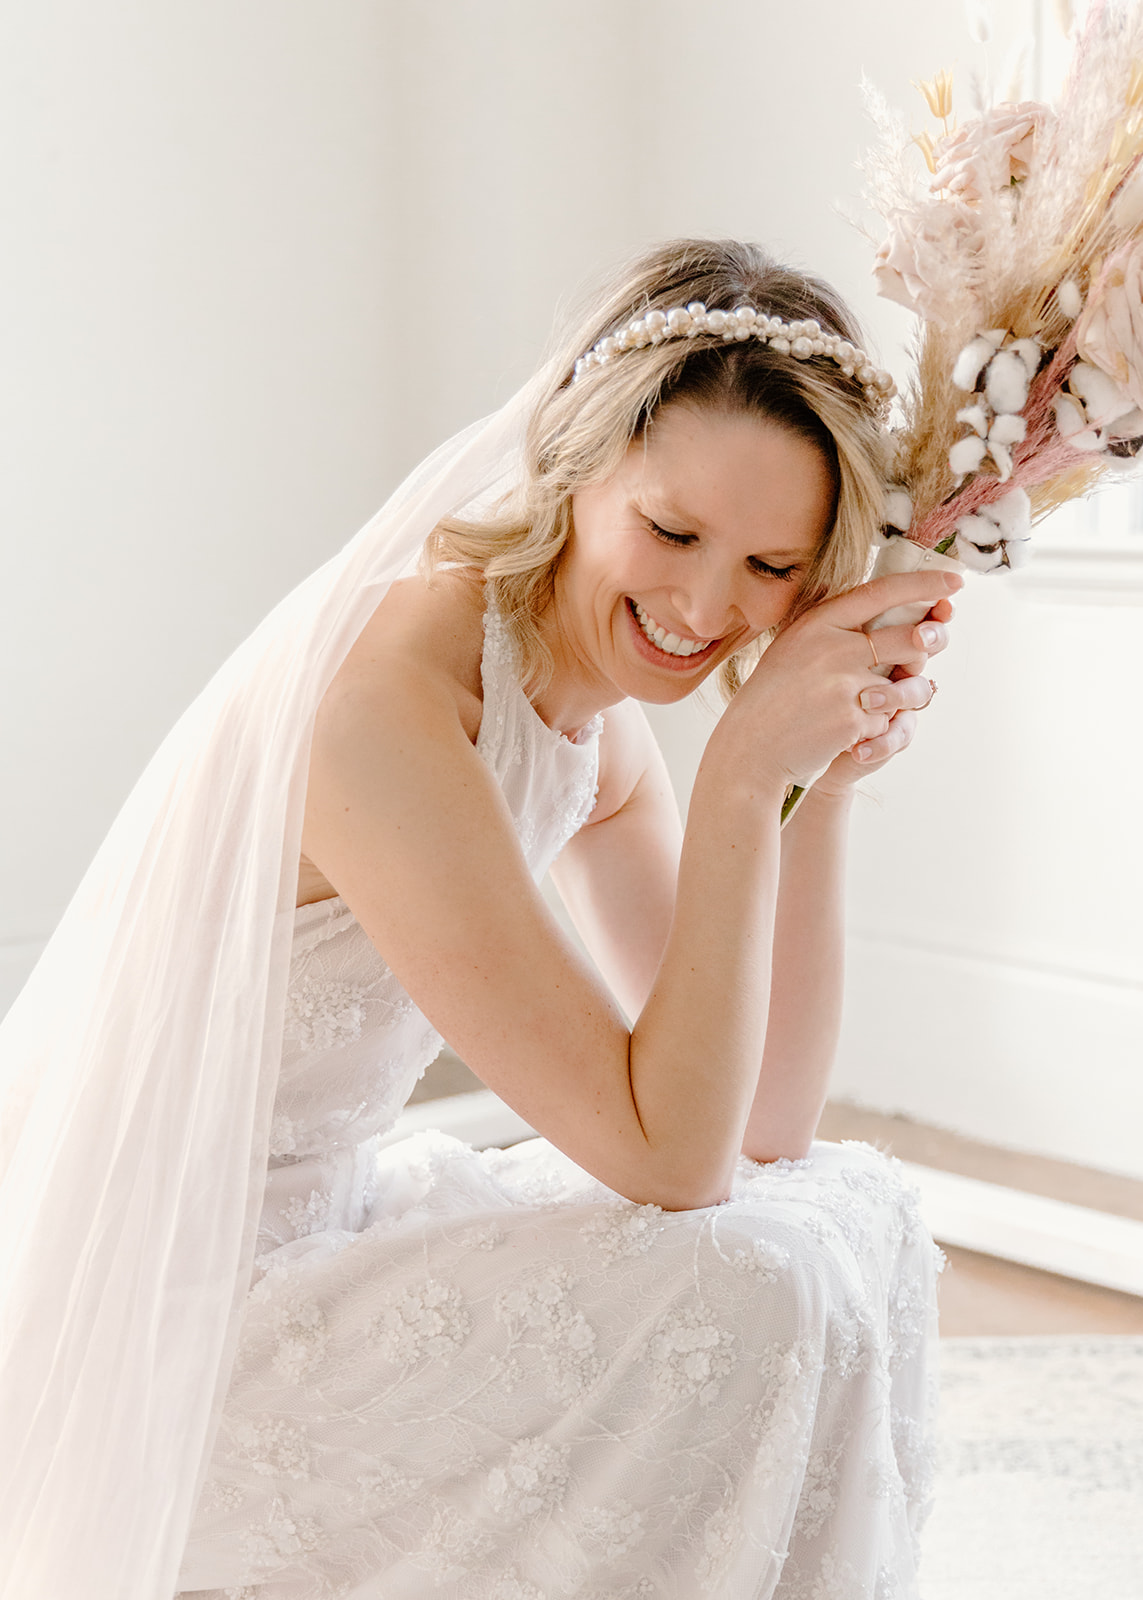 Bride with a pearl headband poses with a dried floral bouquet